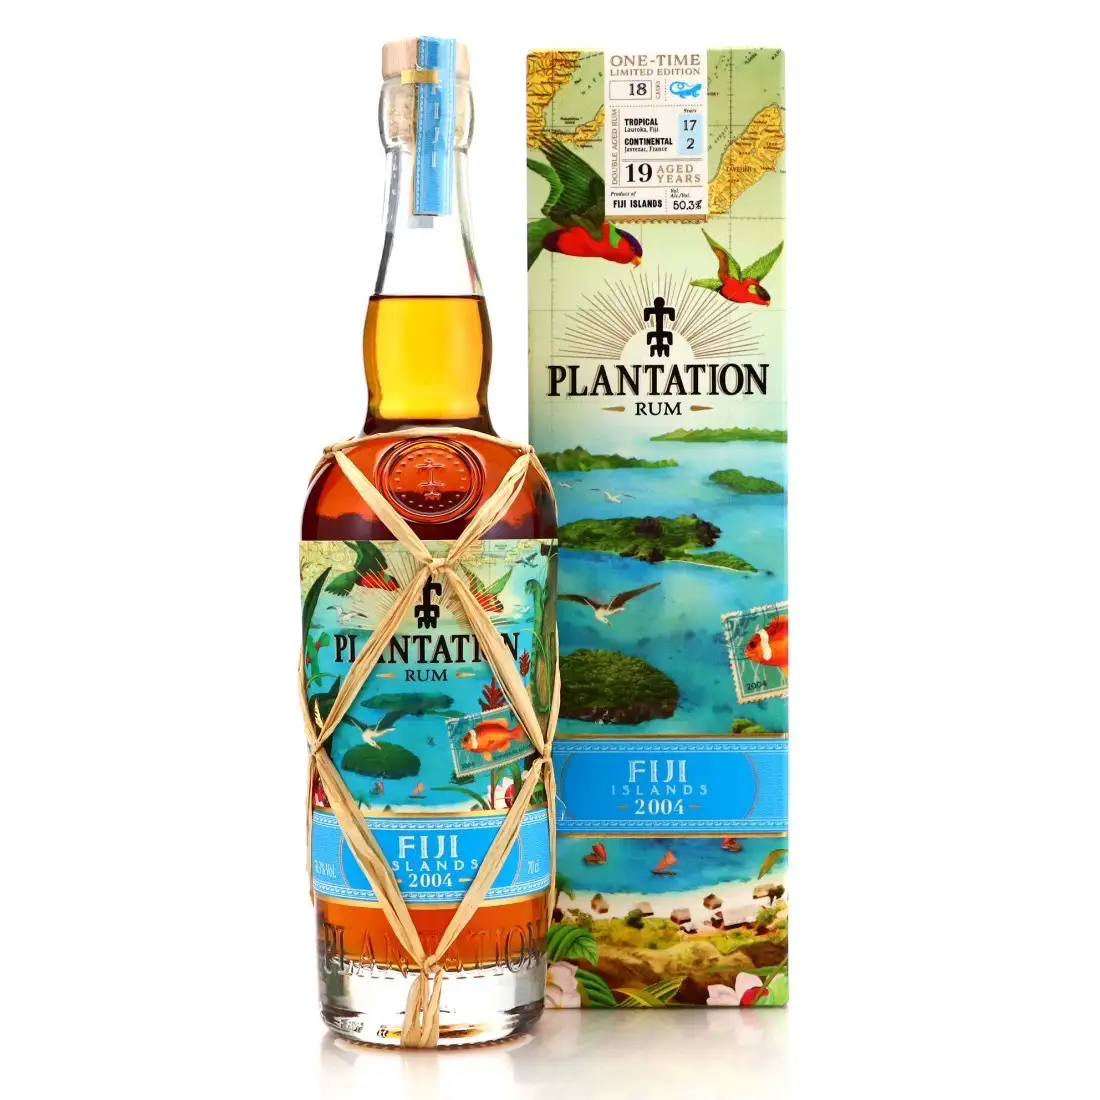 Image of the front of the bottle of the rum Plantation Fiji One-Time